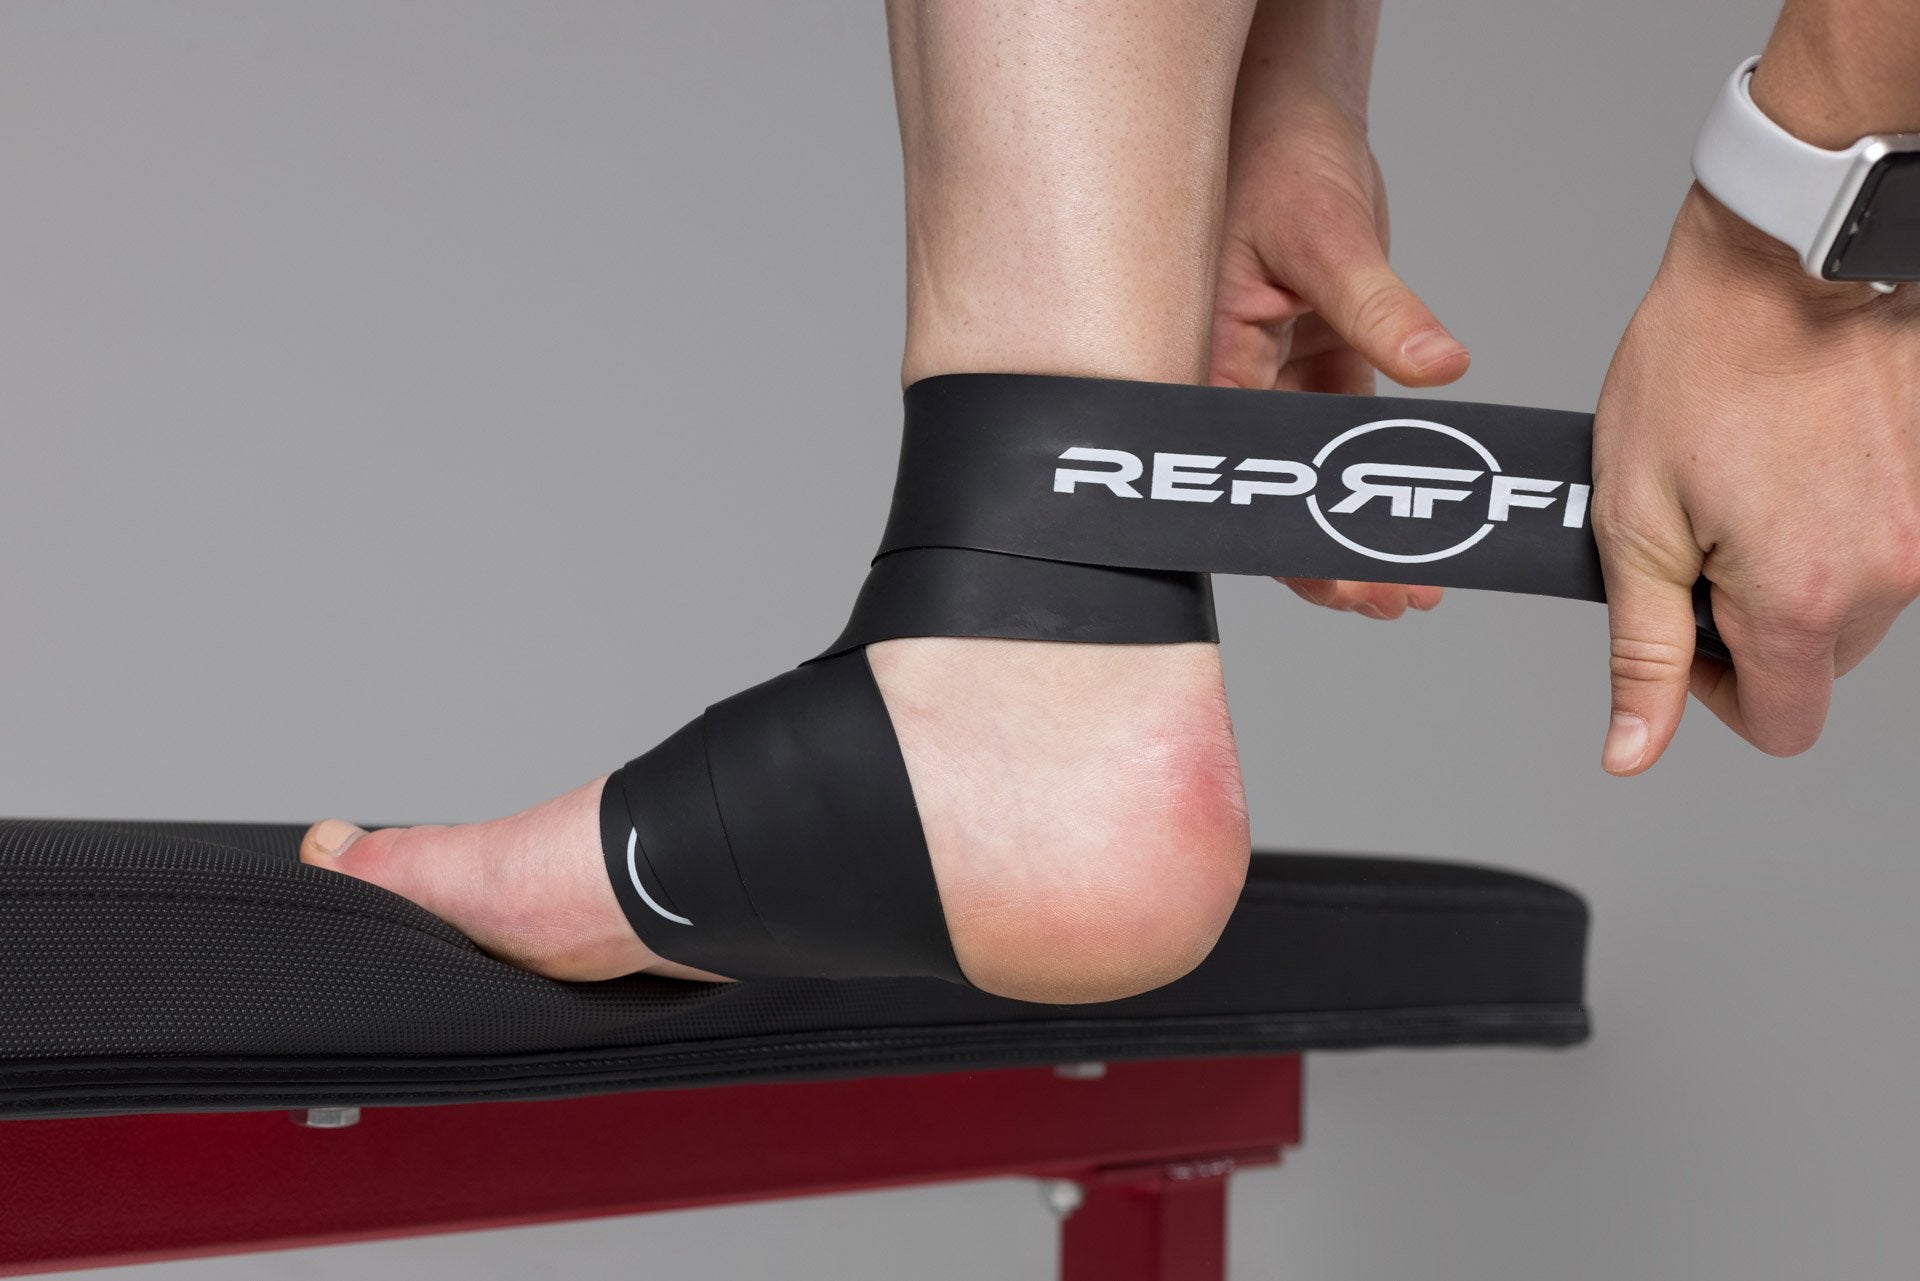 Lifter wrapping a black REP floss band around her ankle.